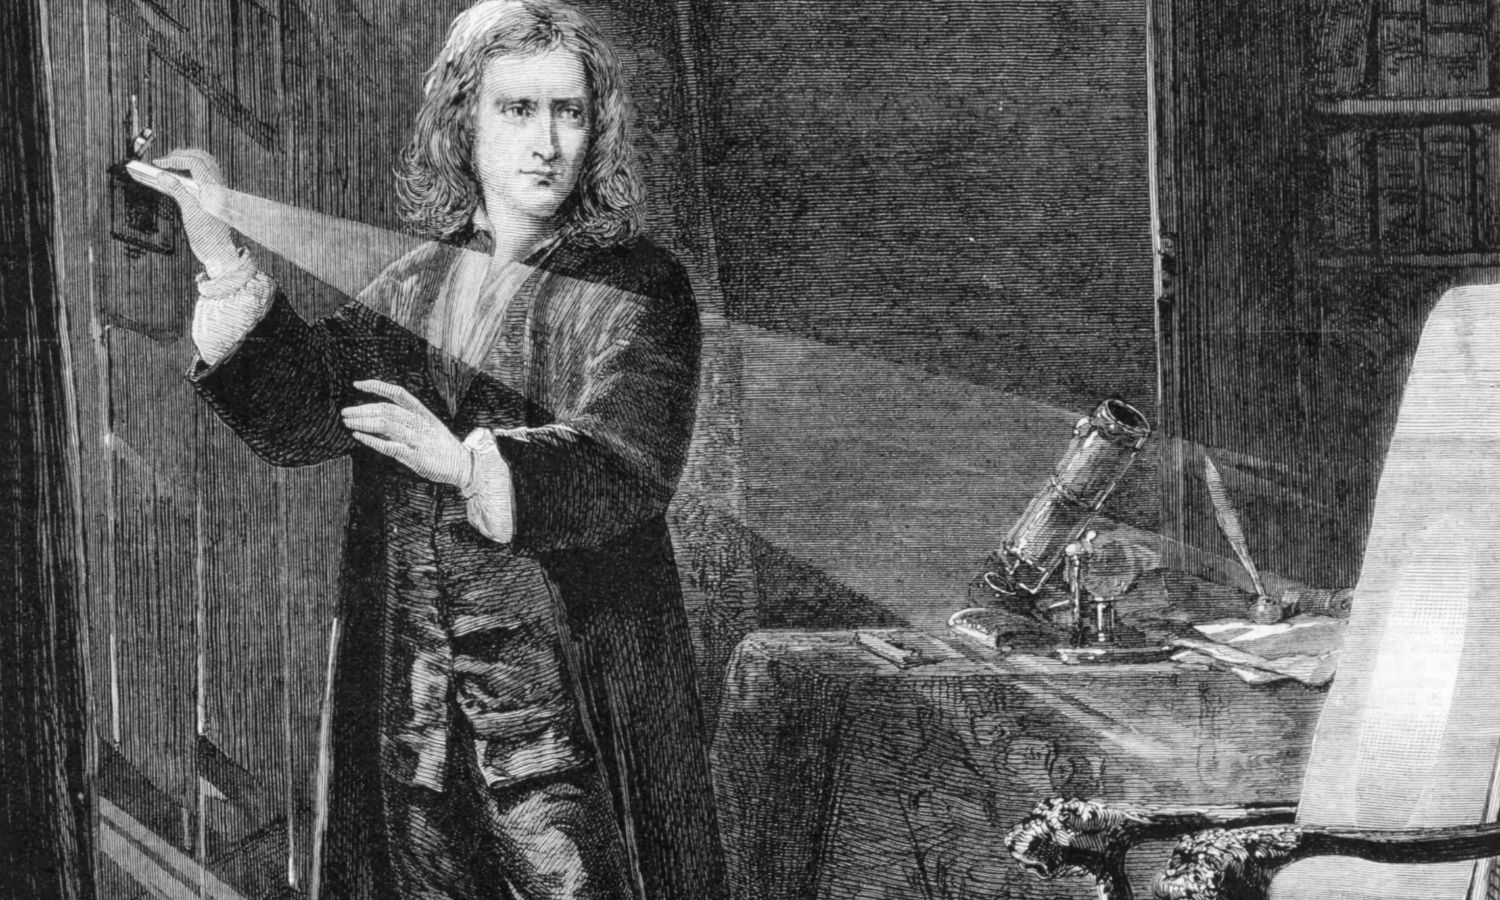 OTD in 1668: Sir Isaac Newton gained a master's degree from Trinity College